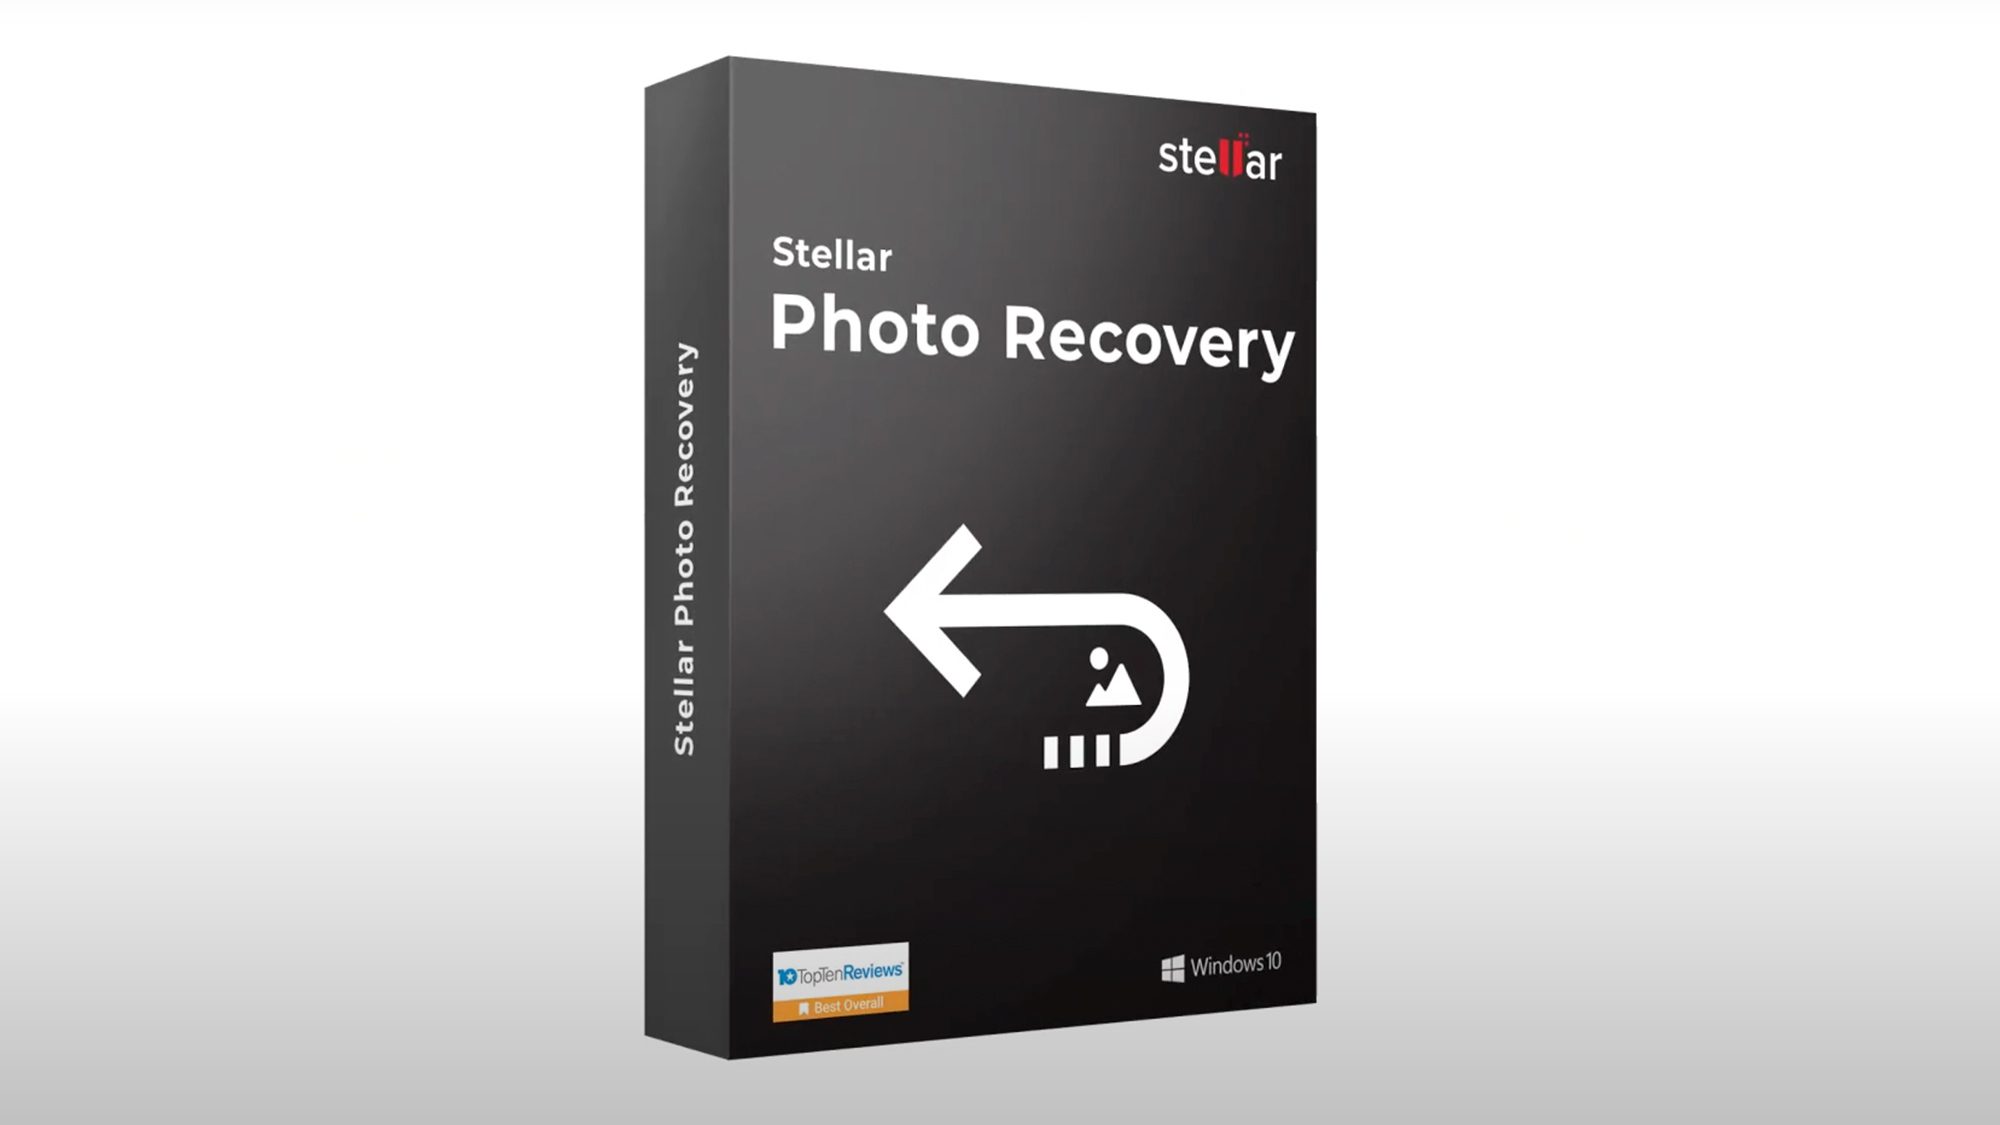 1. Box with Stellar Photo Recovery Professional & Premium software for photo recovery.